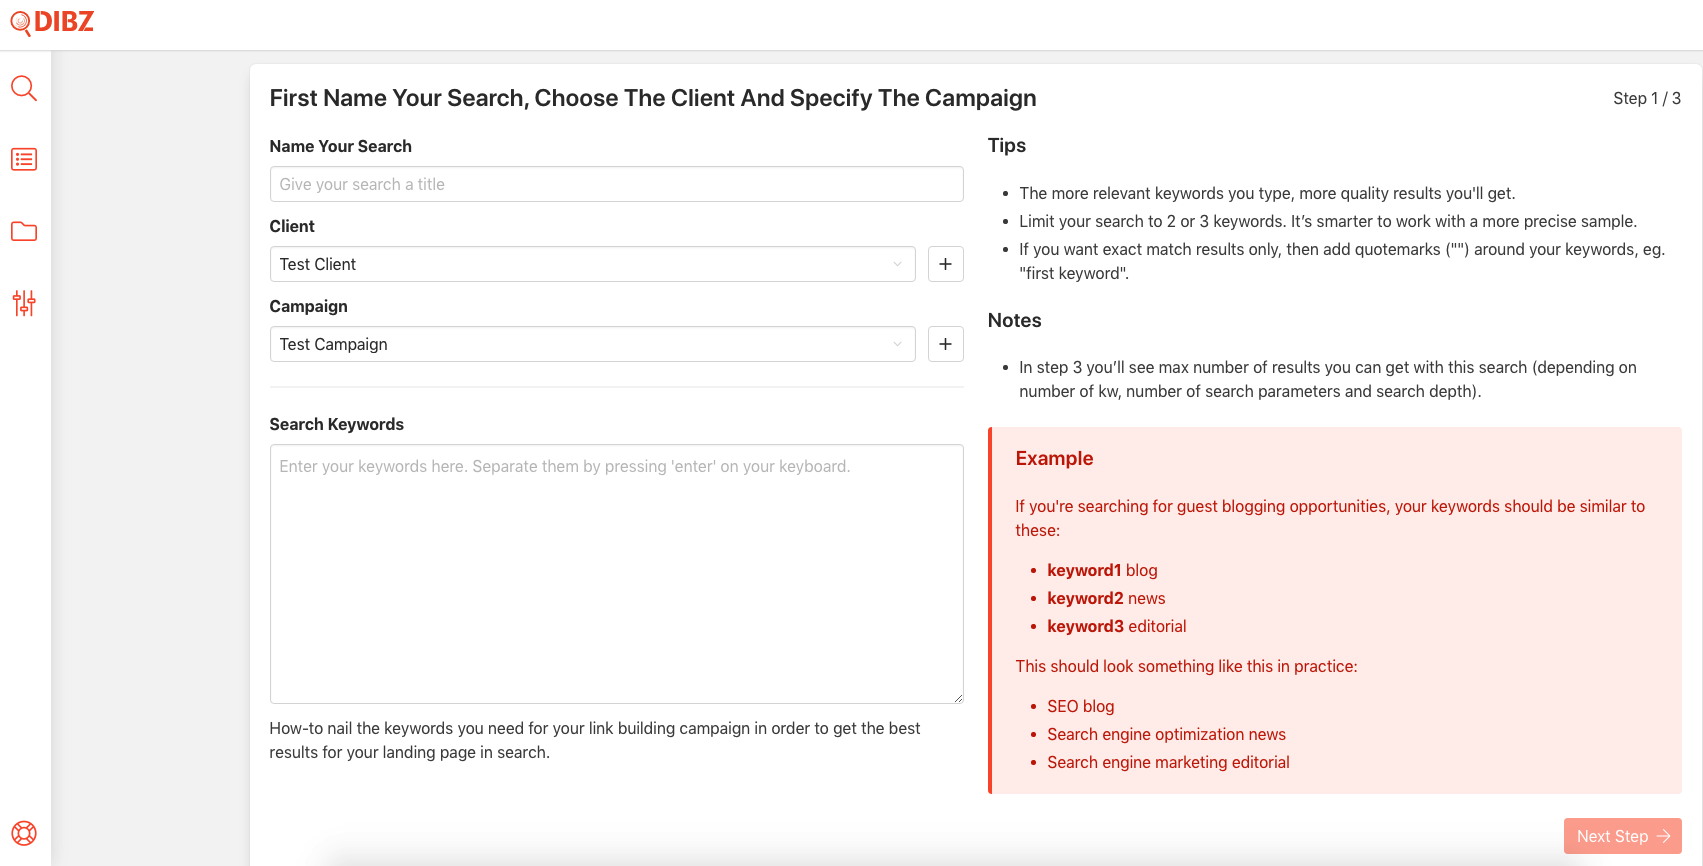 Naming Your Search, Choosing The Client And Specifying The Campaign